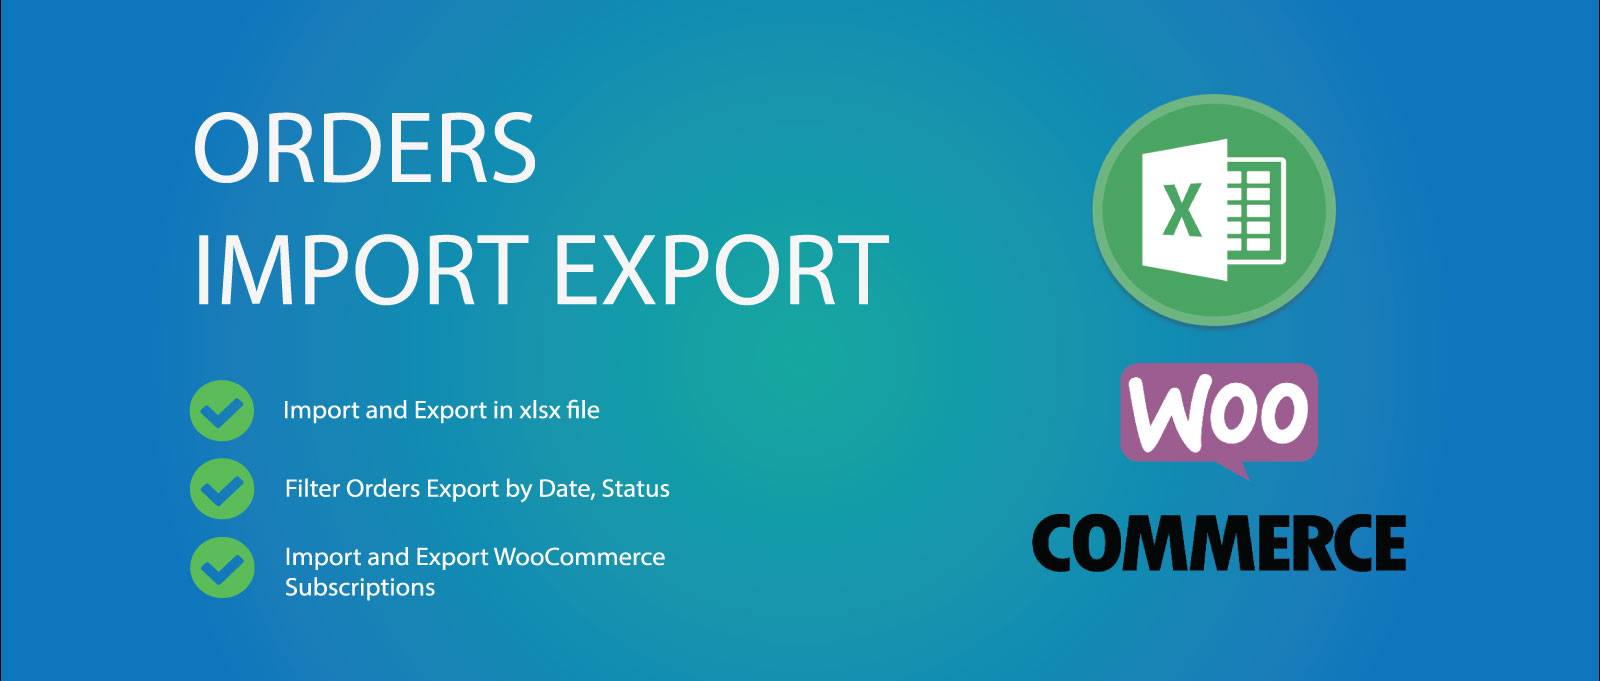 Orders Import Export for WooCommerce with Excel